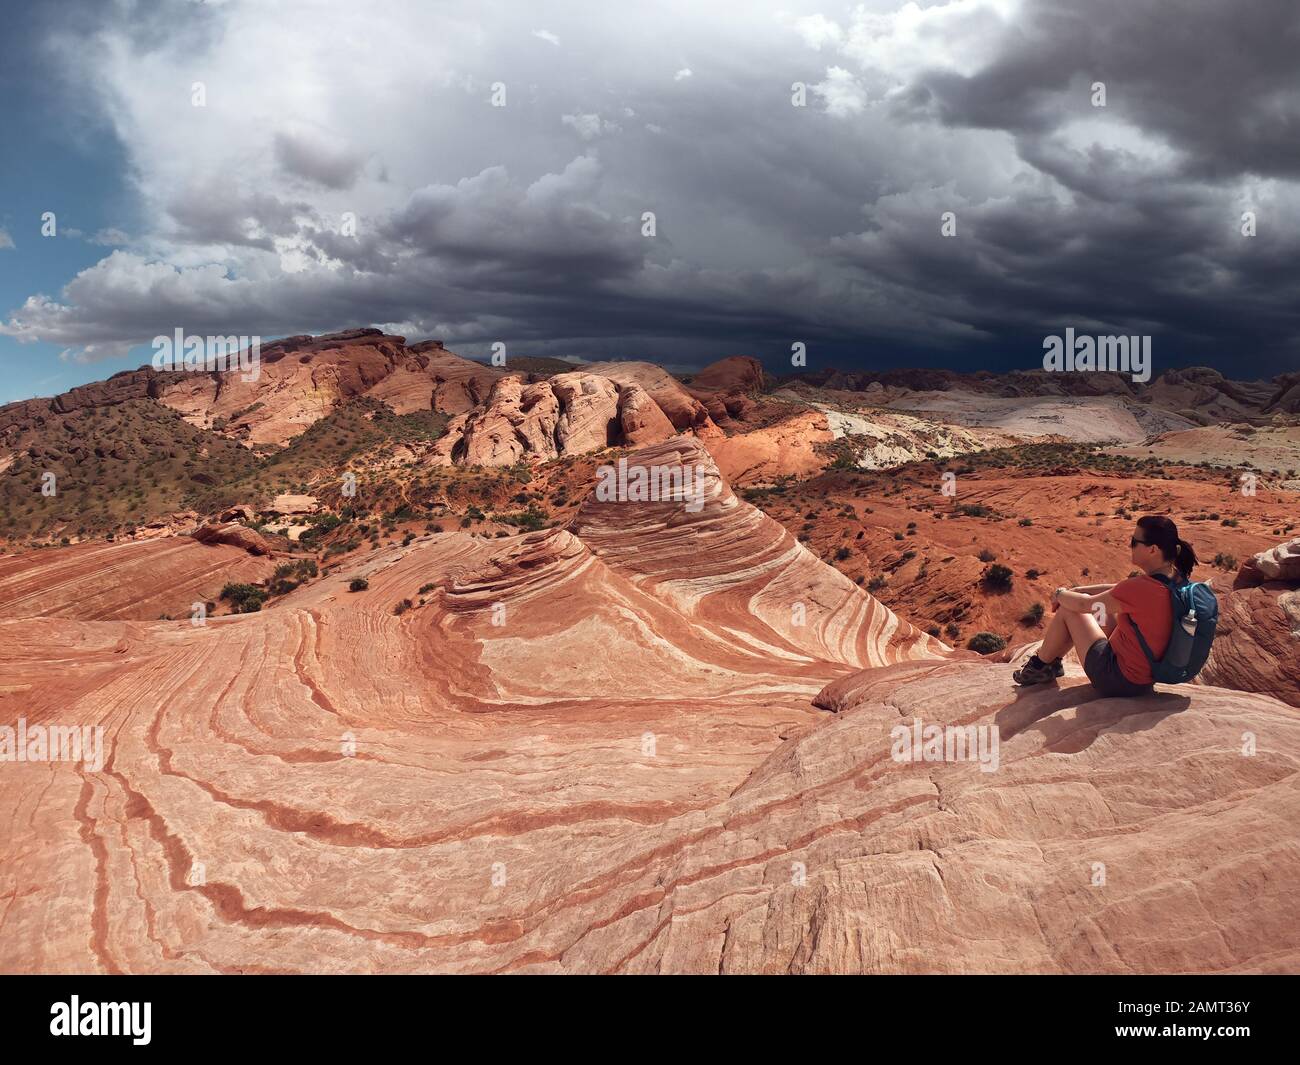 Woman sitting on rocks, Valley of Fire State Park, Nevada, USA Stock Photo